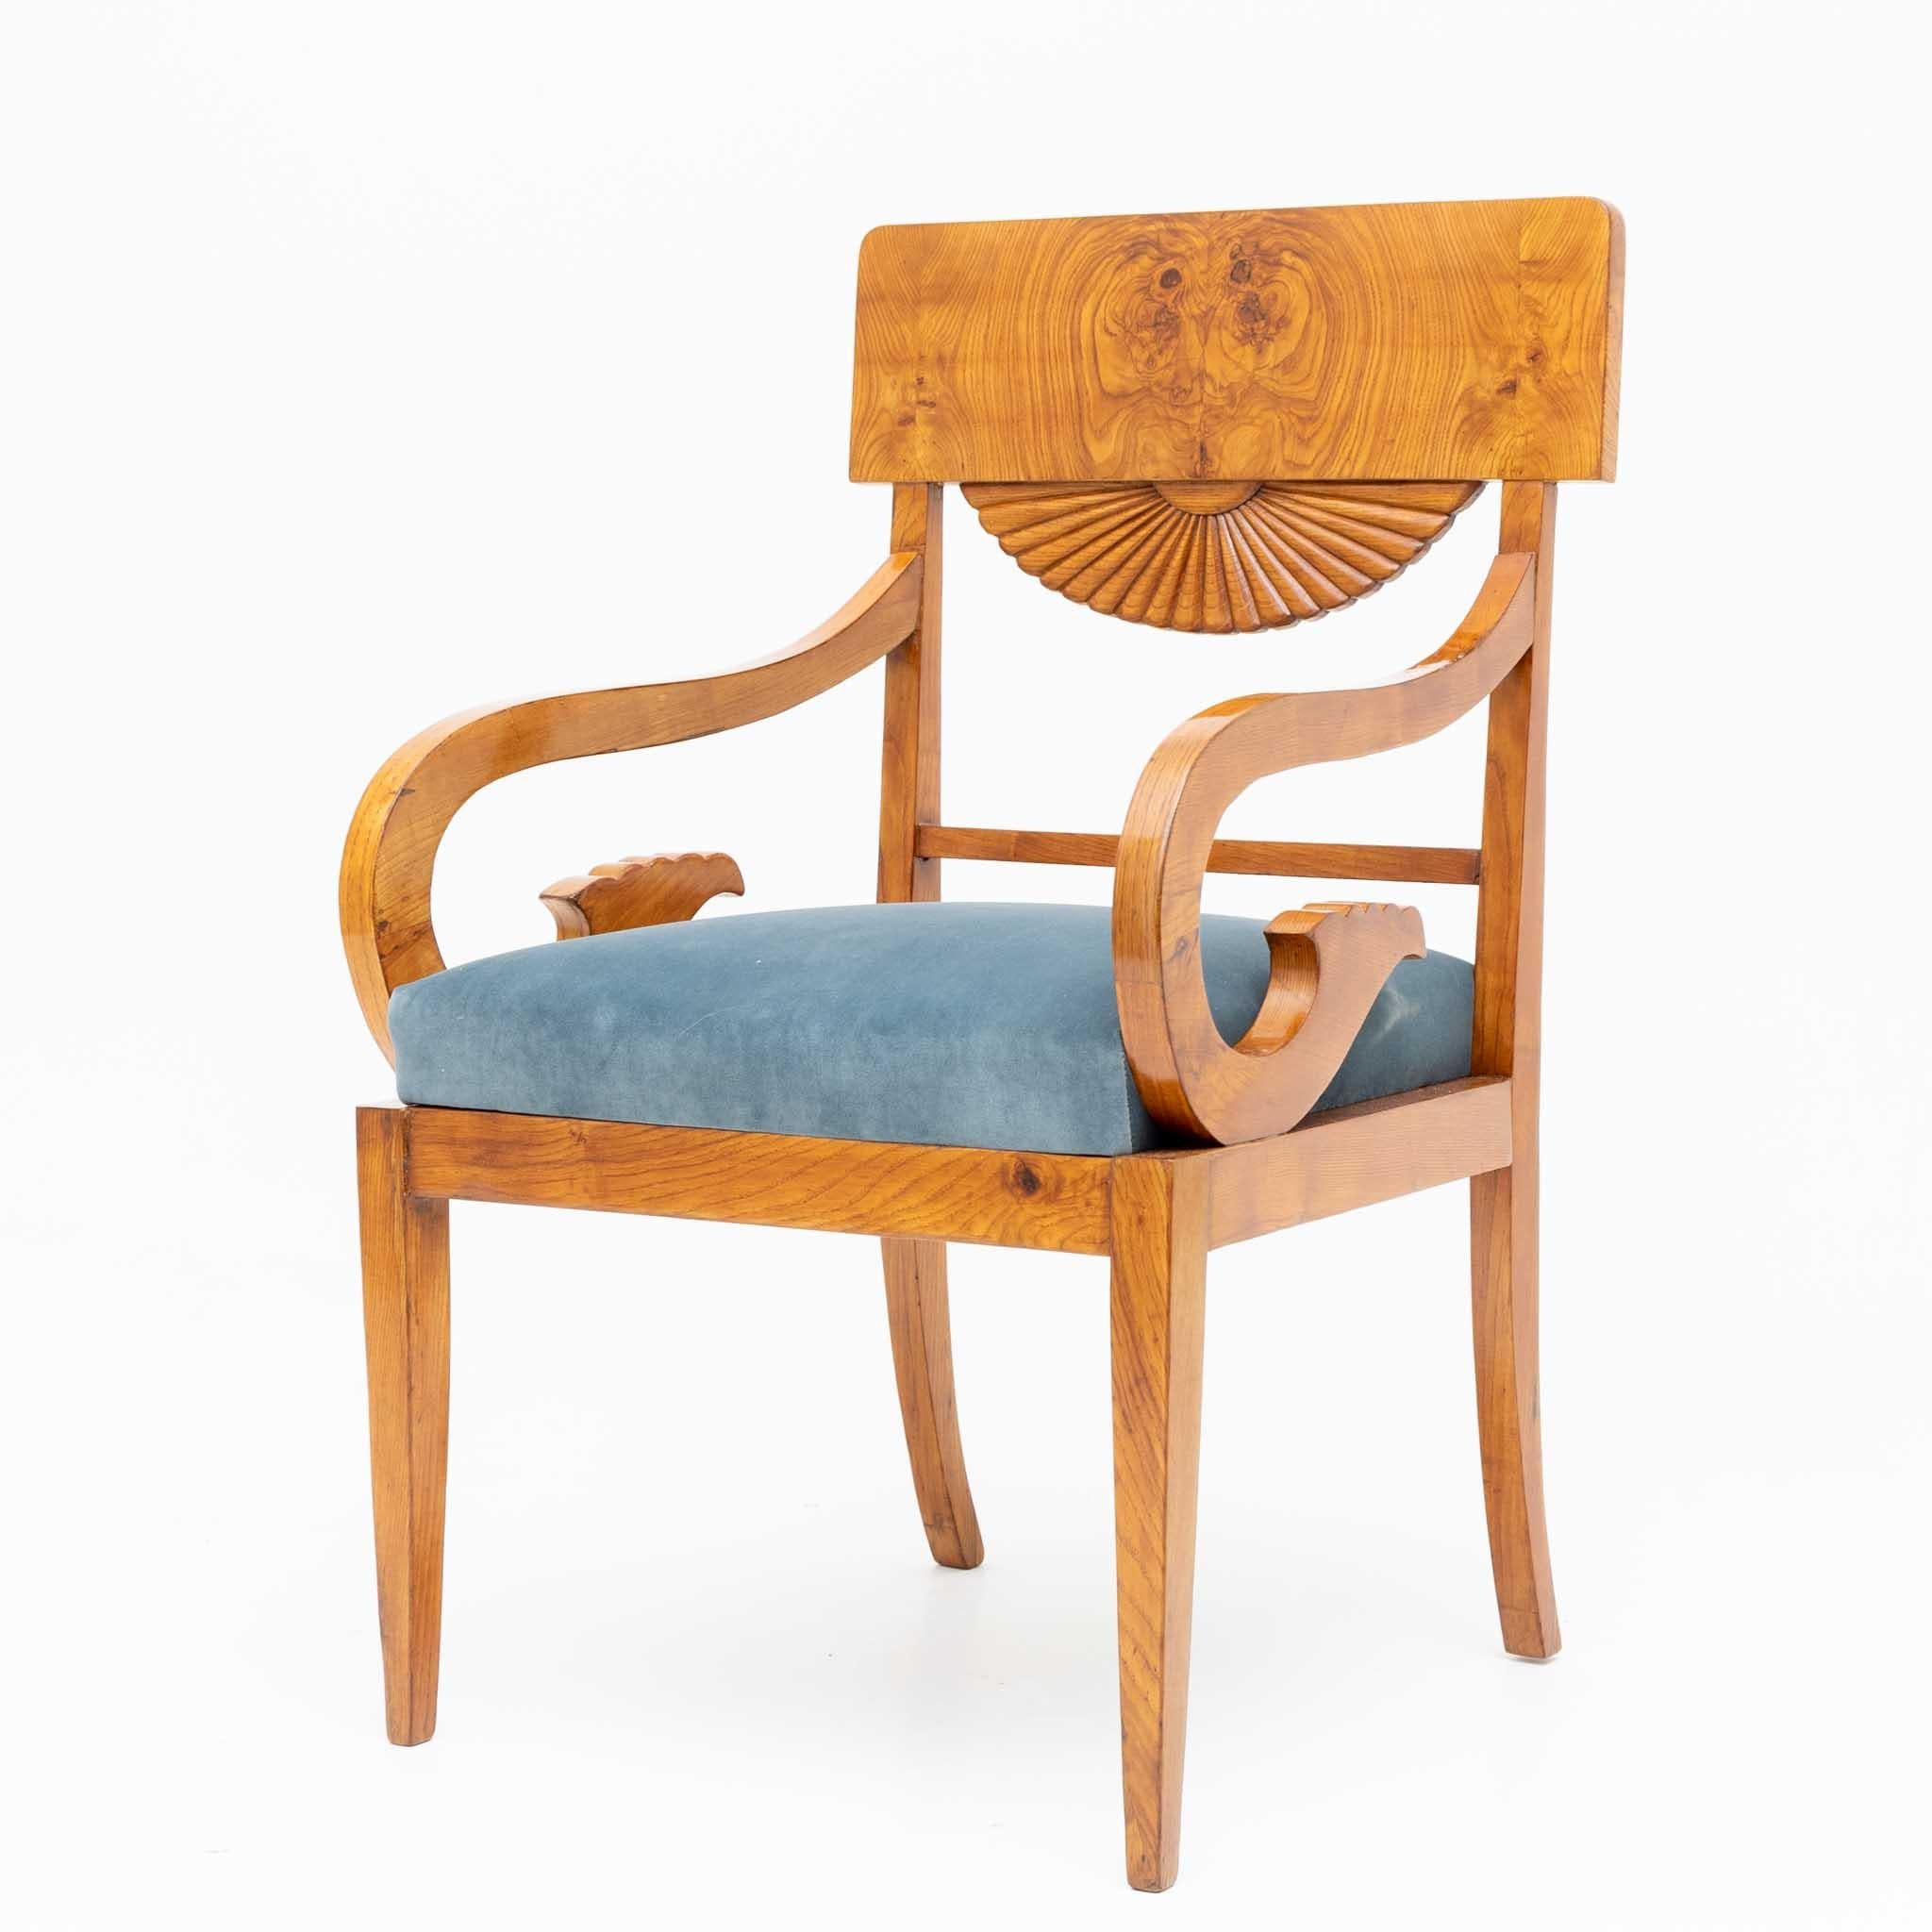 Biedermeier Armchairs with Blue Upholstery, Baltic States Around 1830 For Sale 1